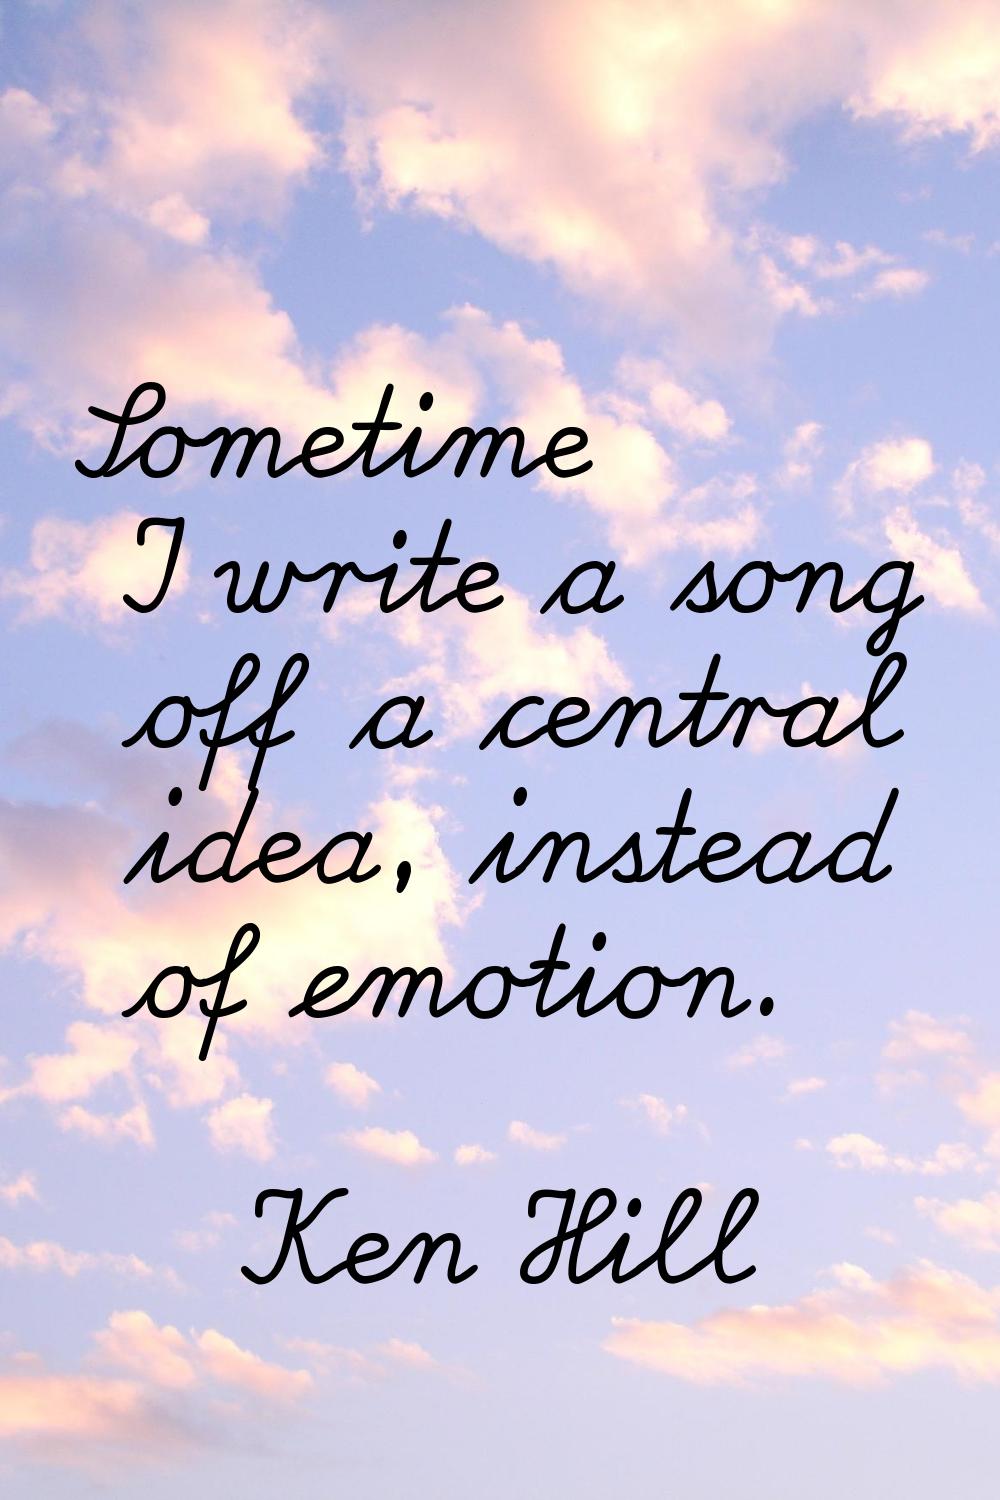 Sometime I write a song off a central idea, instead of emotion.